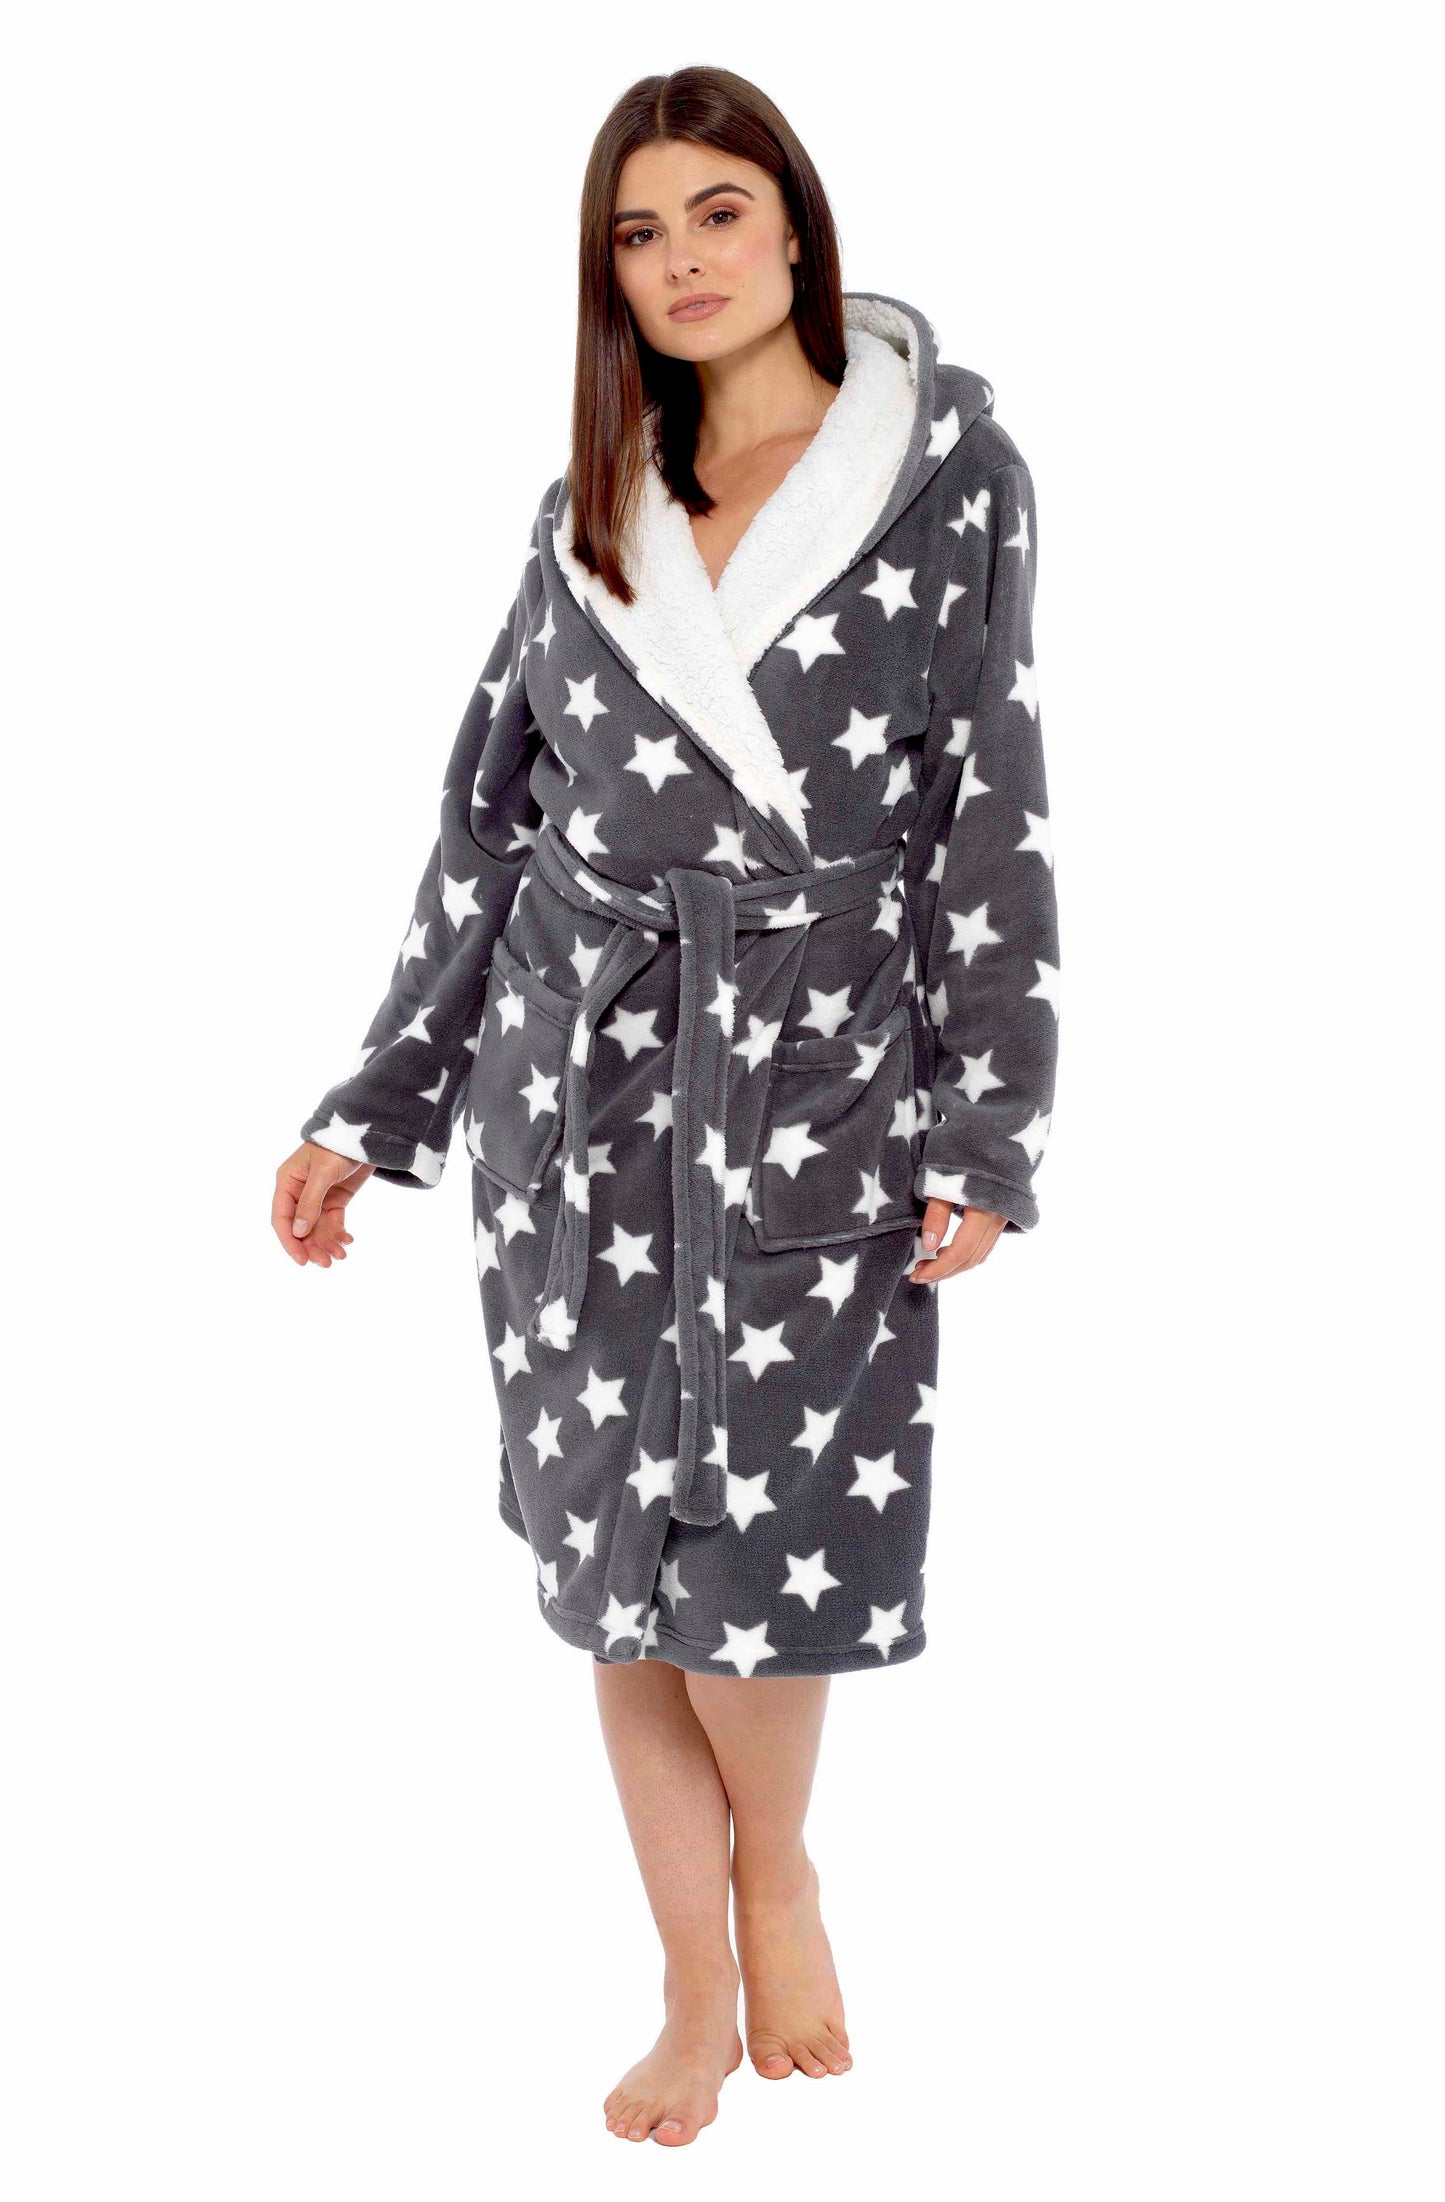 Women's Stars Plush Fleece Hooded Robe Dressing Gown, Ladies Bath Robe Loungewear. Buy now for £20.00. A Robe by Daisy Dreamer. 12-14, 16-18, 20-22, 8-10, bridesmaid, charcoal, daisy dreamer, dressing gown, flannel, fleece, grey, gym, hooded robe, hotel,